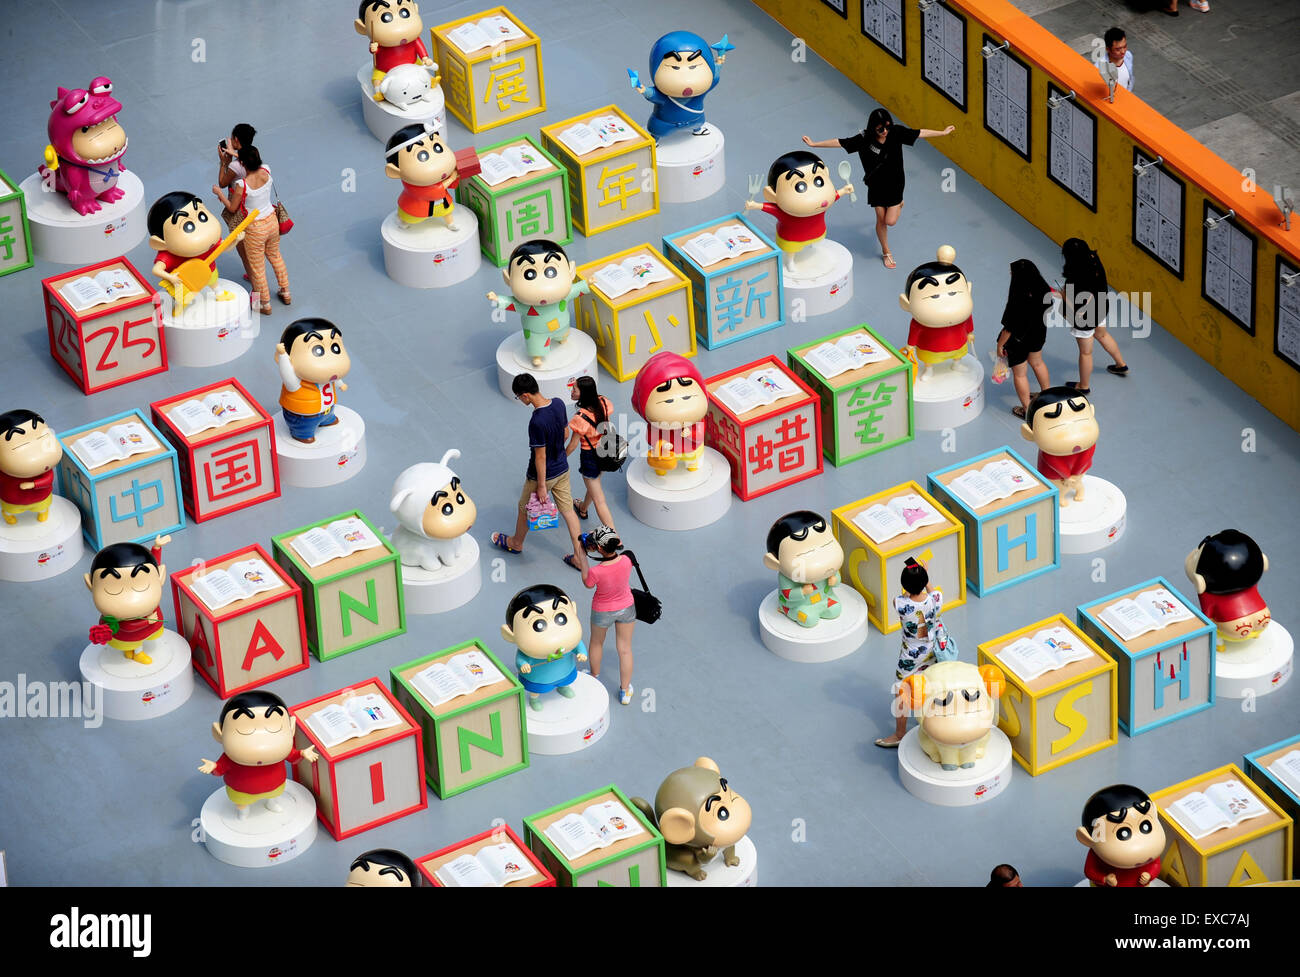 Shenyang. 11th July, 2015. Citizens visit an exhibition marking the 25th anniversary of Japanese manga series Crayon Shin-chan in Shenyang, northeast China's Liaoning Province July 11, 2015. Dozens of manga and theatrical version of Crayon Shin-chan and related figures were displayed on the exhibition that opened to public on Saturday. © Xinhua/Alamy Live News Stock Photo